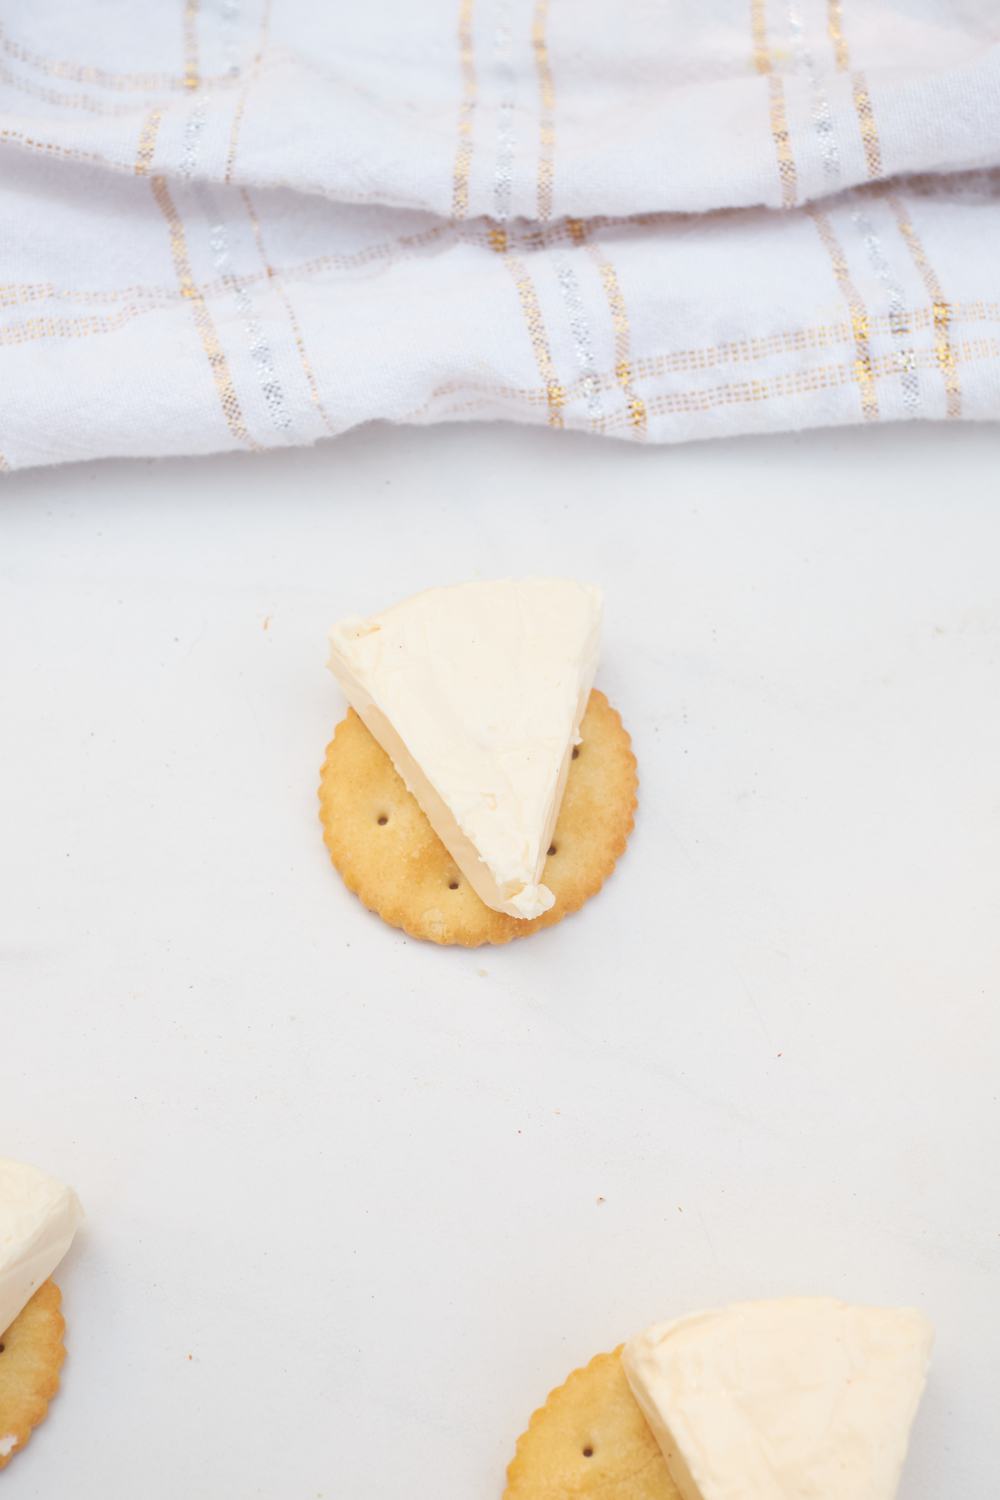 triangle cheese on a cracker